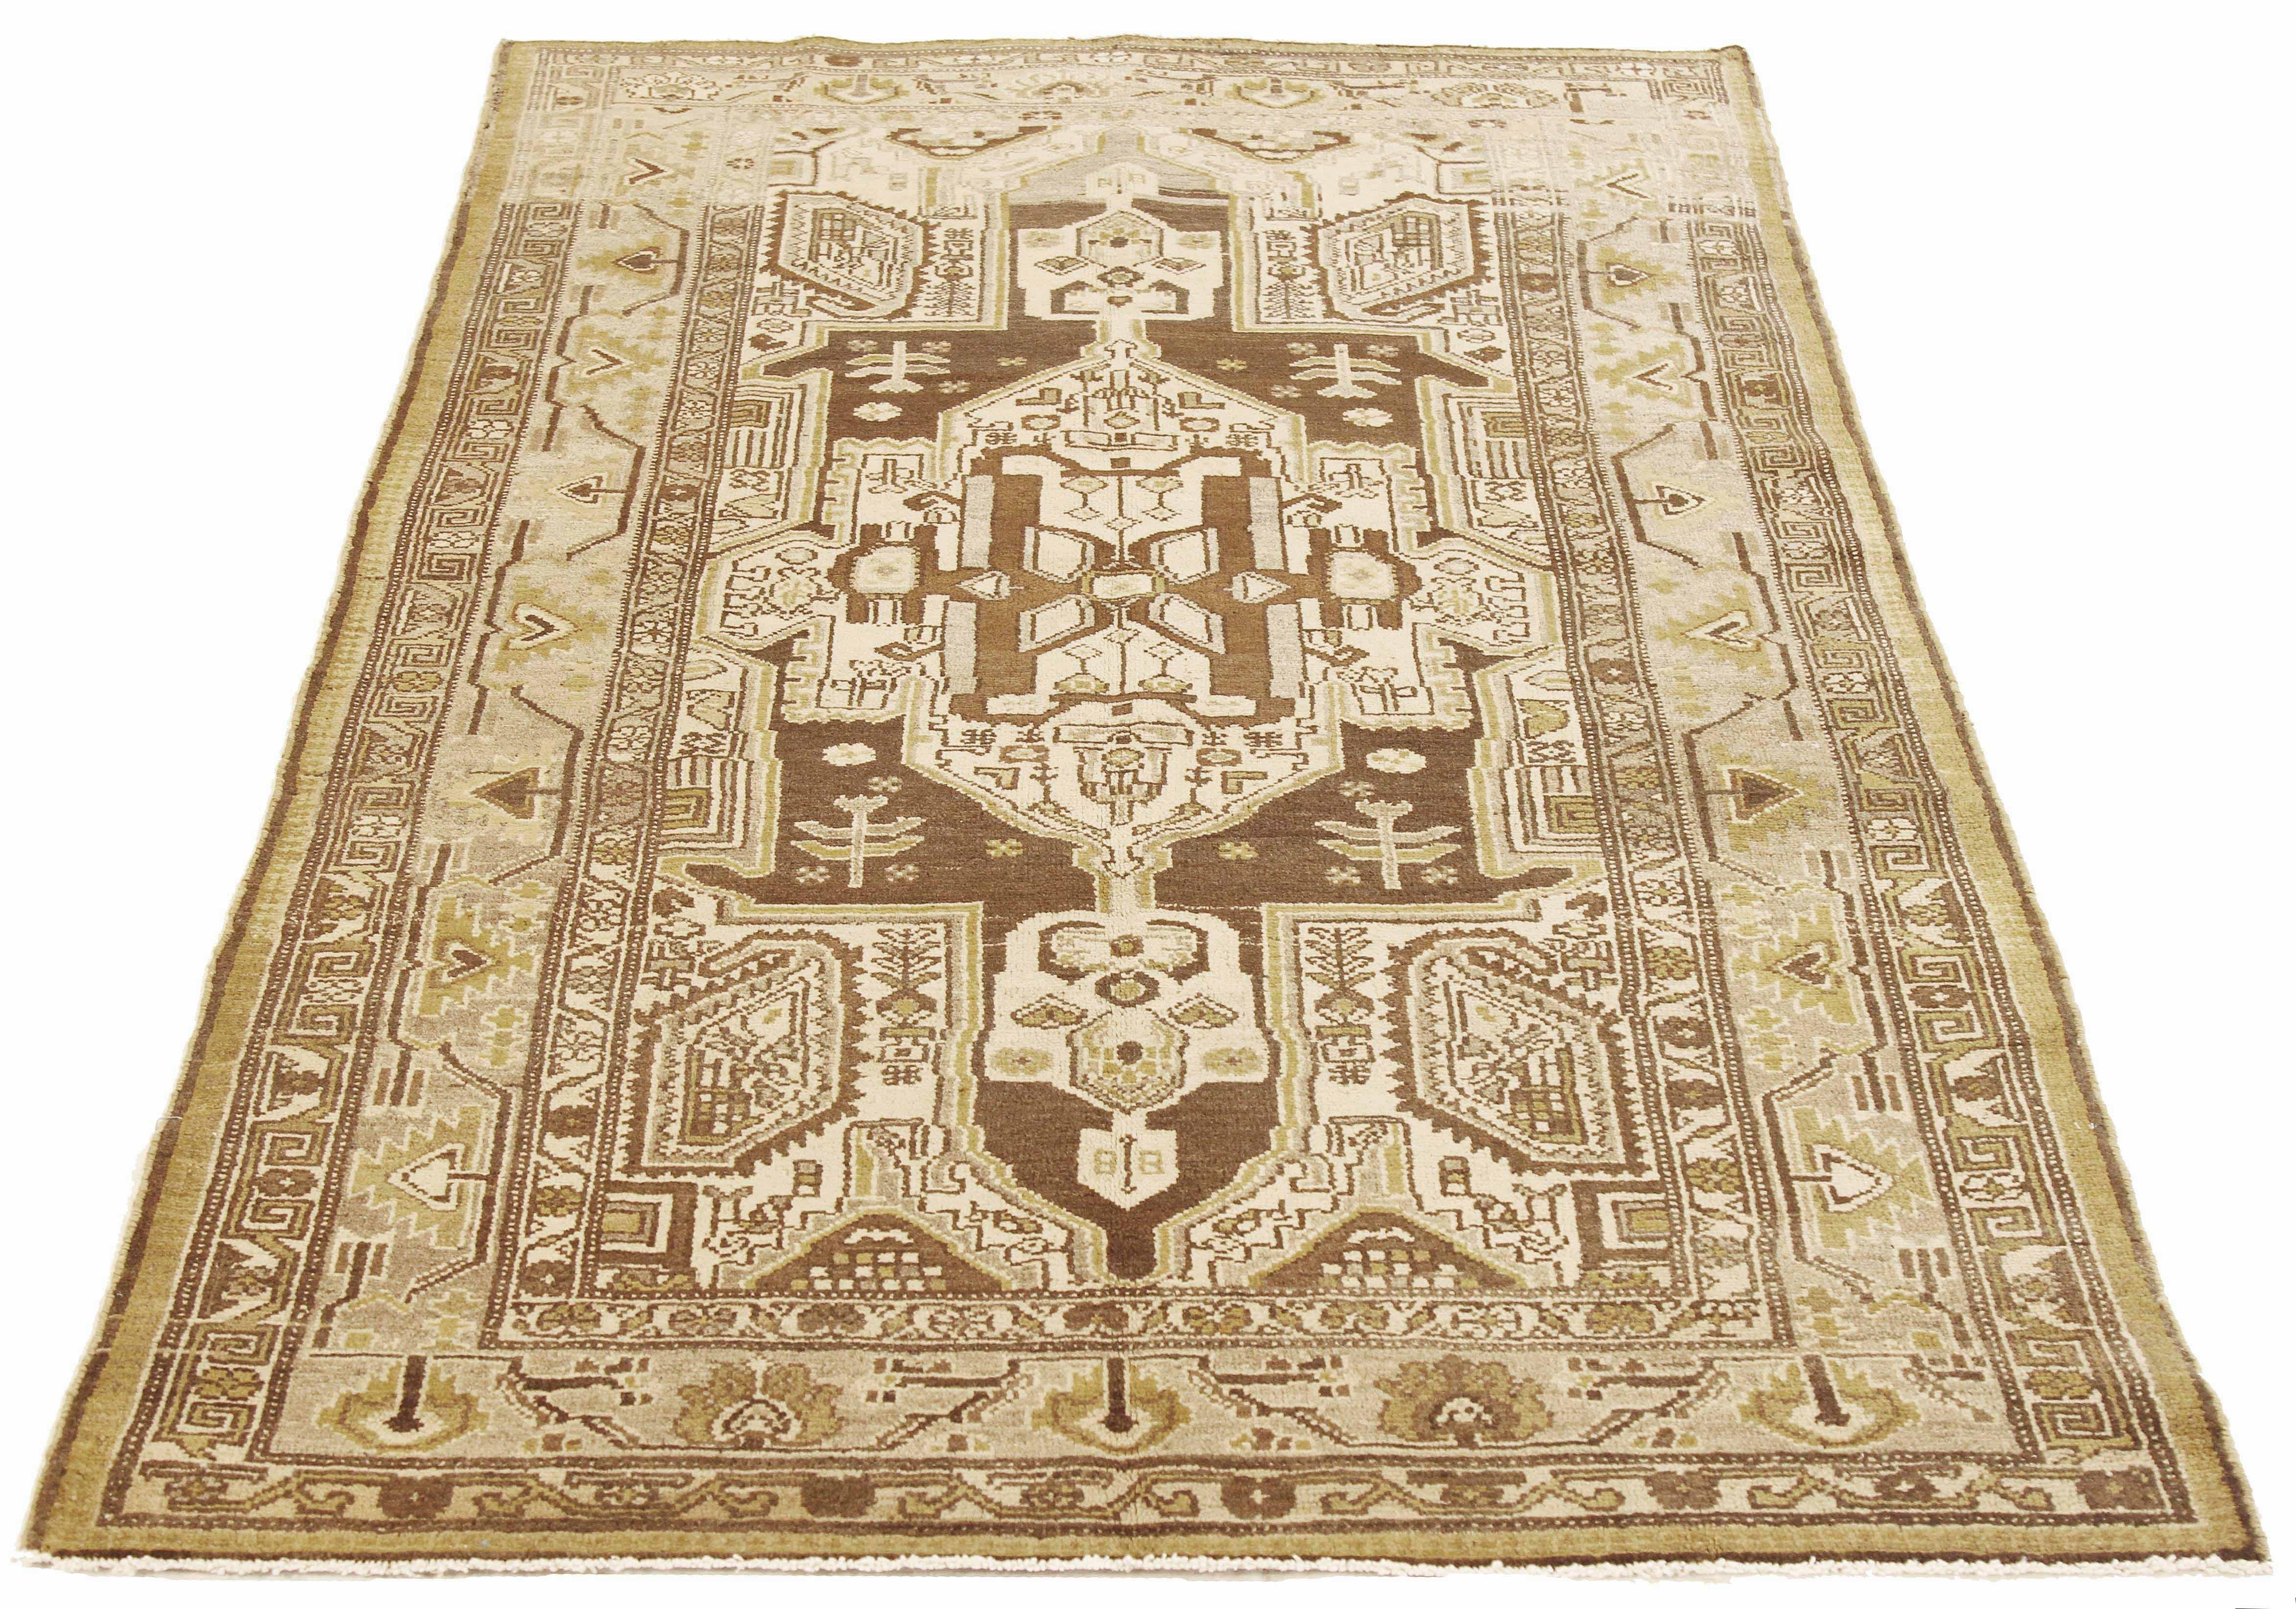 Antique Persian rug handwoven from the finest sheep’s wool and colored with all-natural vegetable dyes that are safe for humans and pets. It’s a traditional Zanjan design featuring geometric tribal details in brown and gold on an ivory field. It’s a